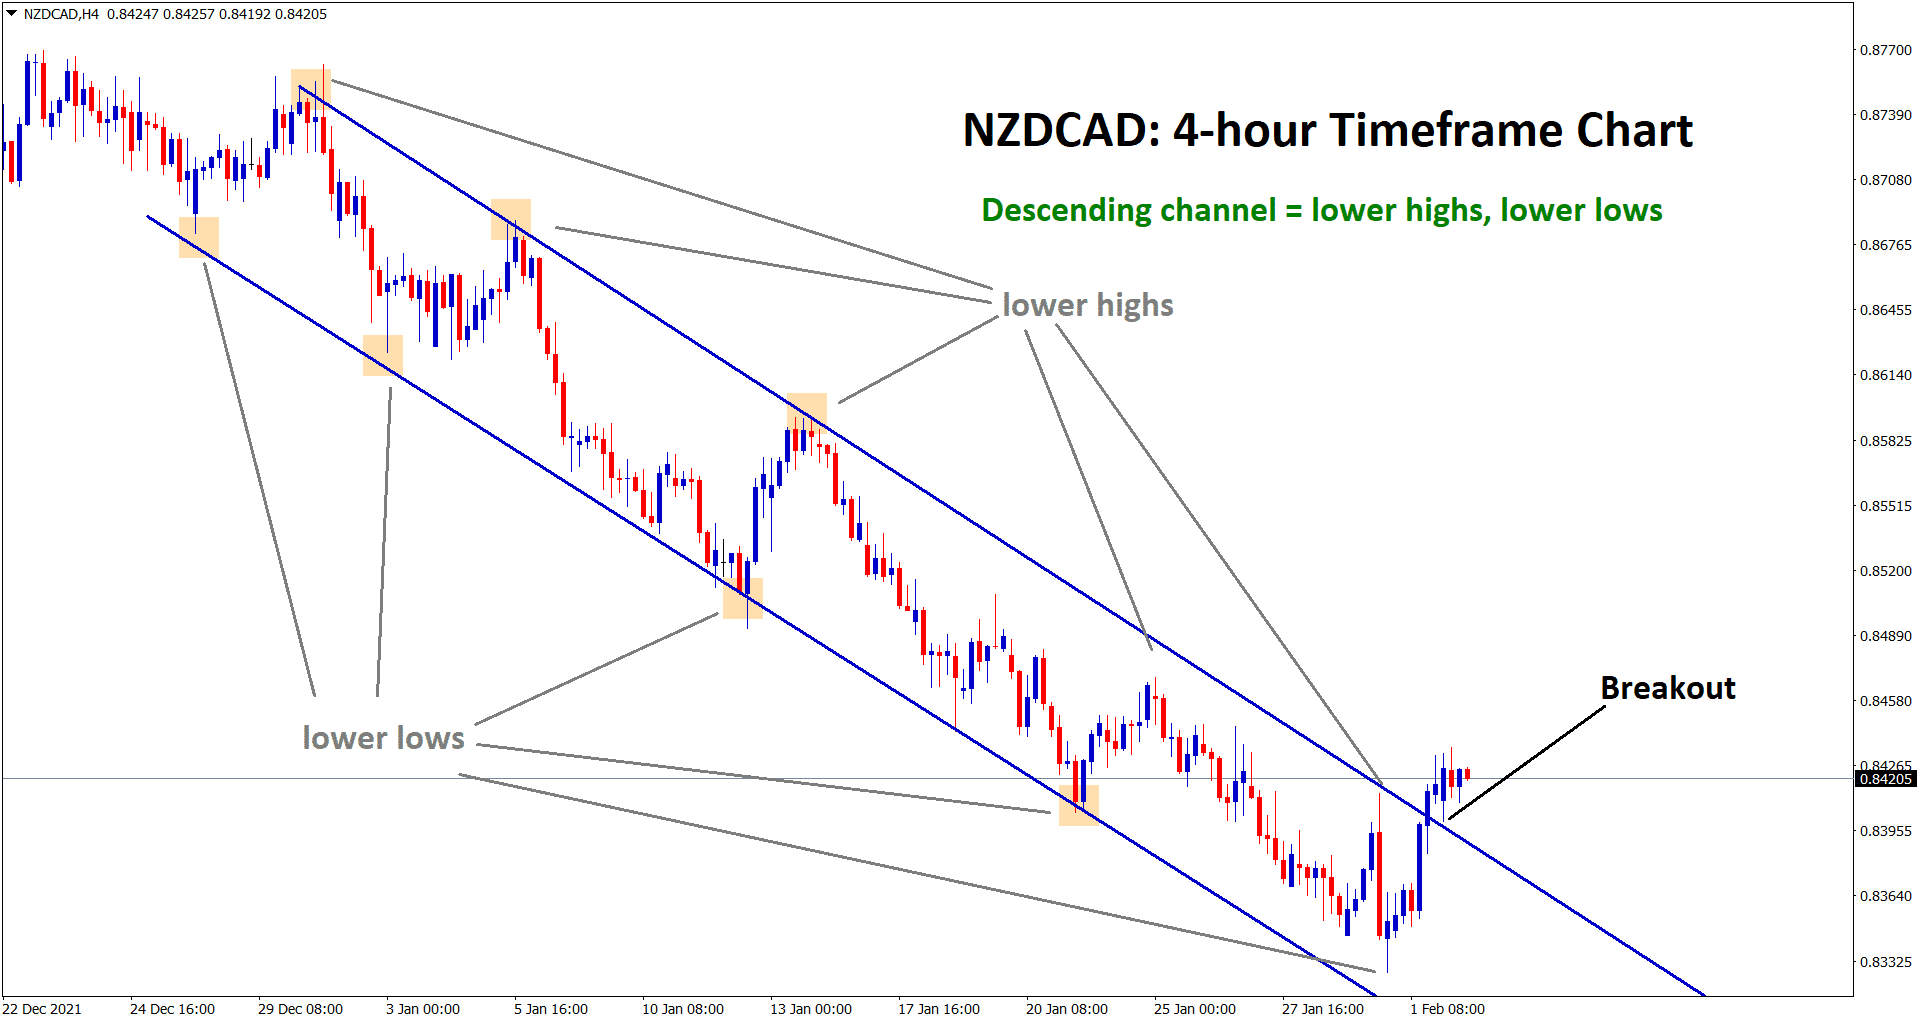 NZDCAD has broken the top of the descending channel in the 4 hour timeframe chart